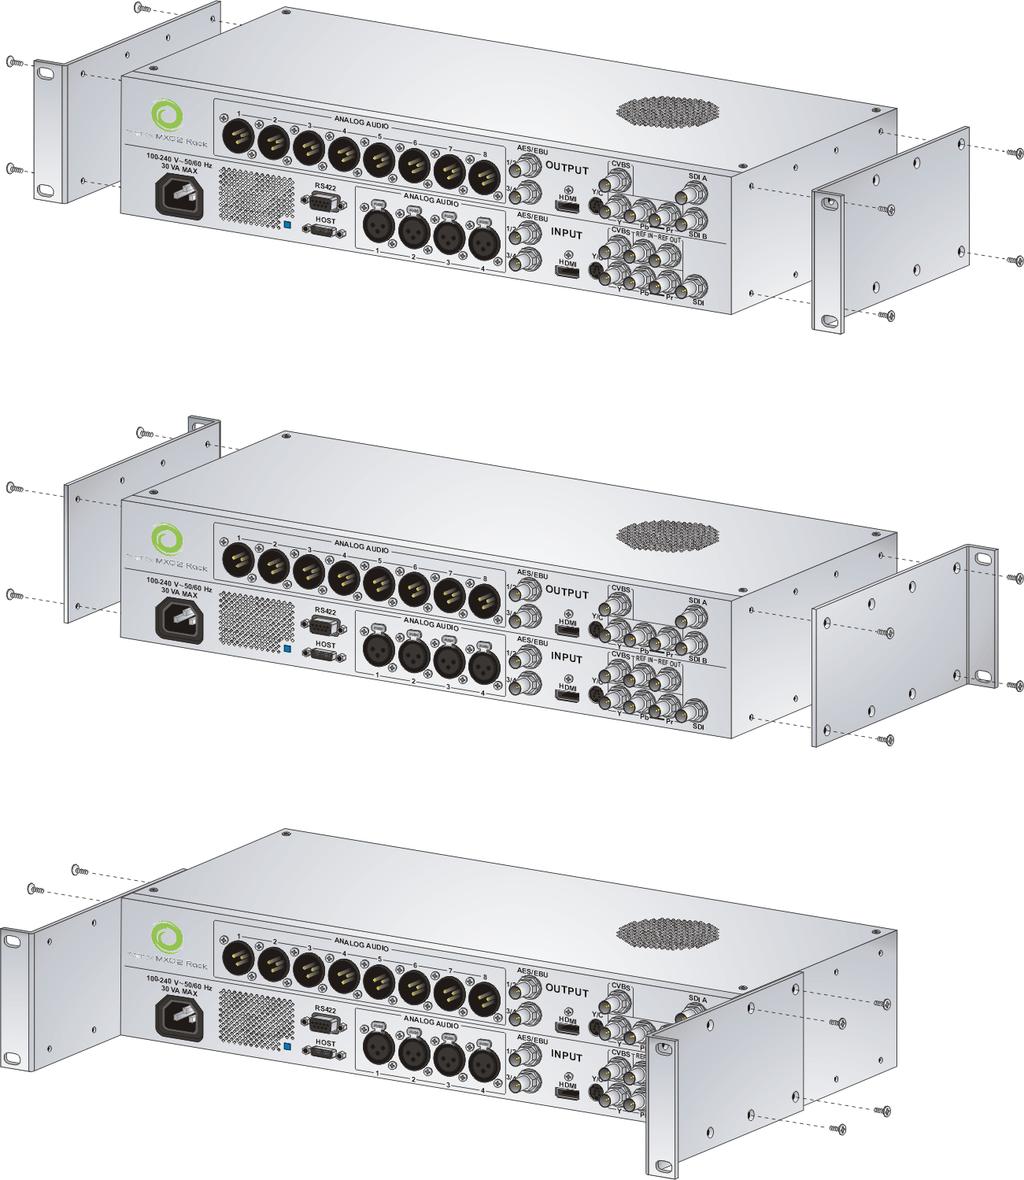 23 3 MXO2 Rack can be recess mounted to allow extra space for connectors and cables.